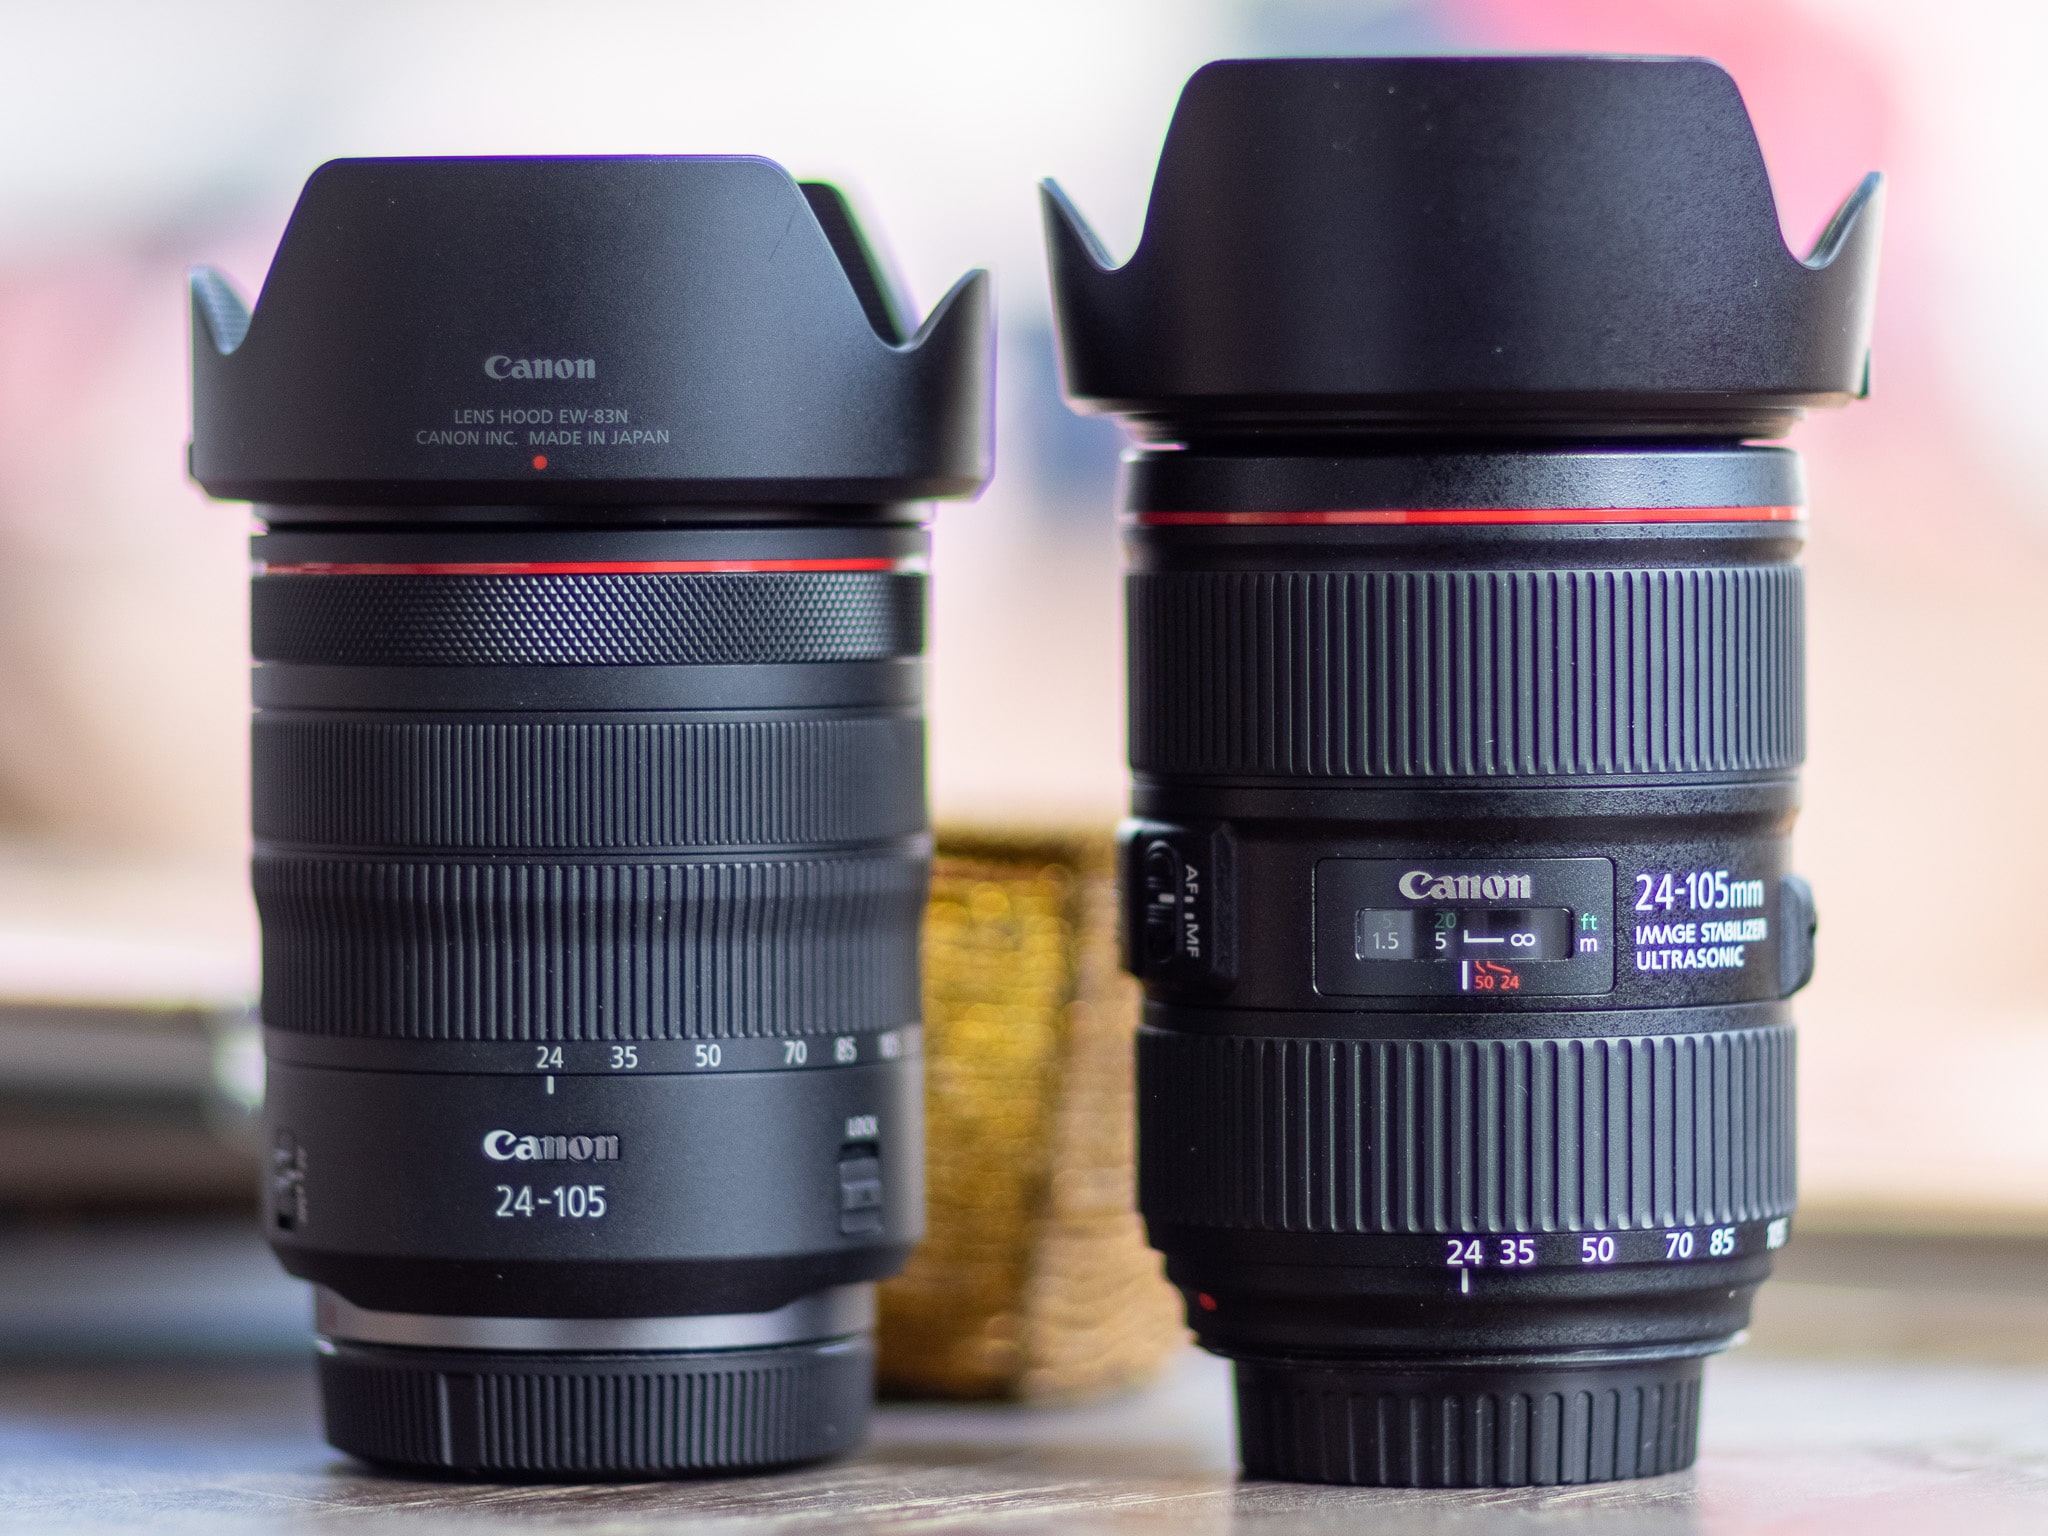 Comparison of the EF and RF version of the 24-105 f/4L IS on the 